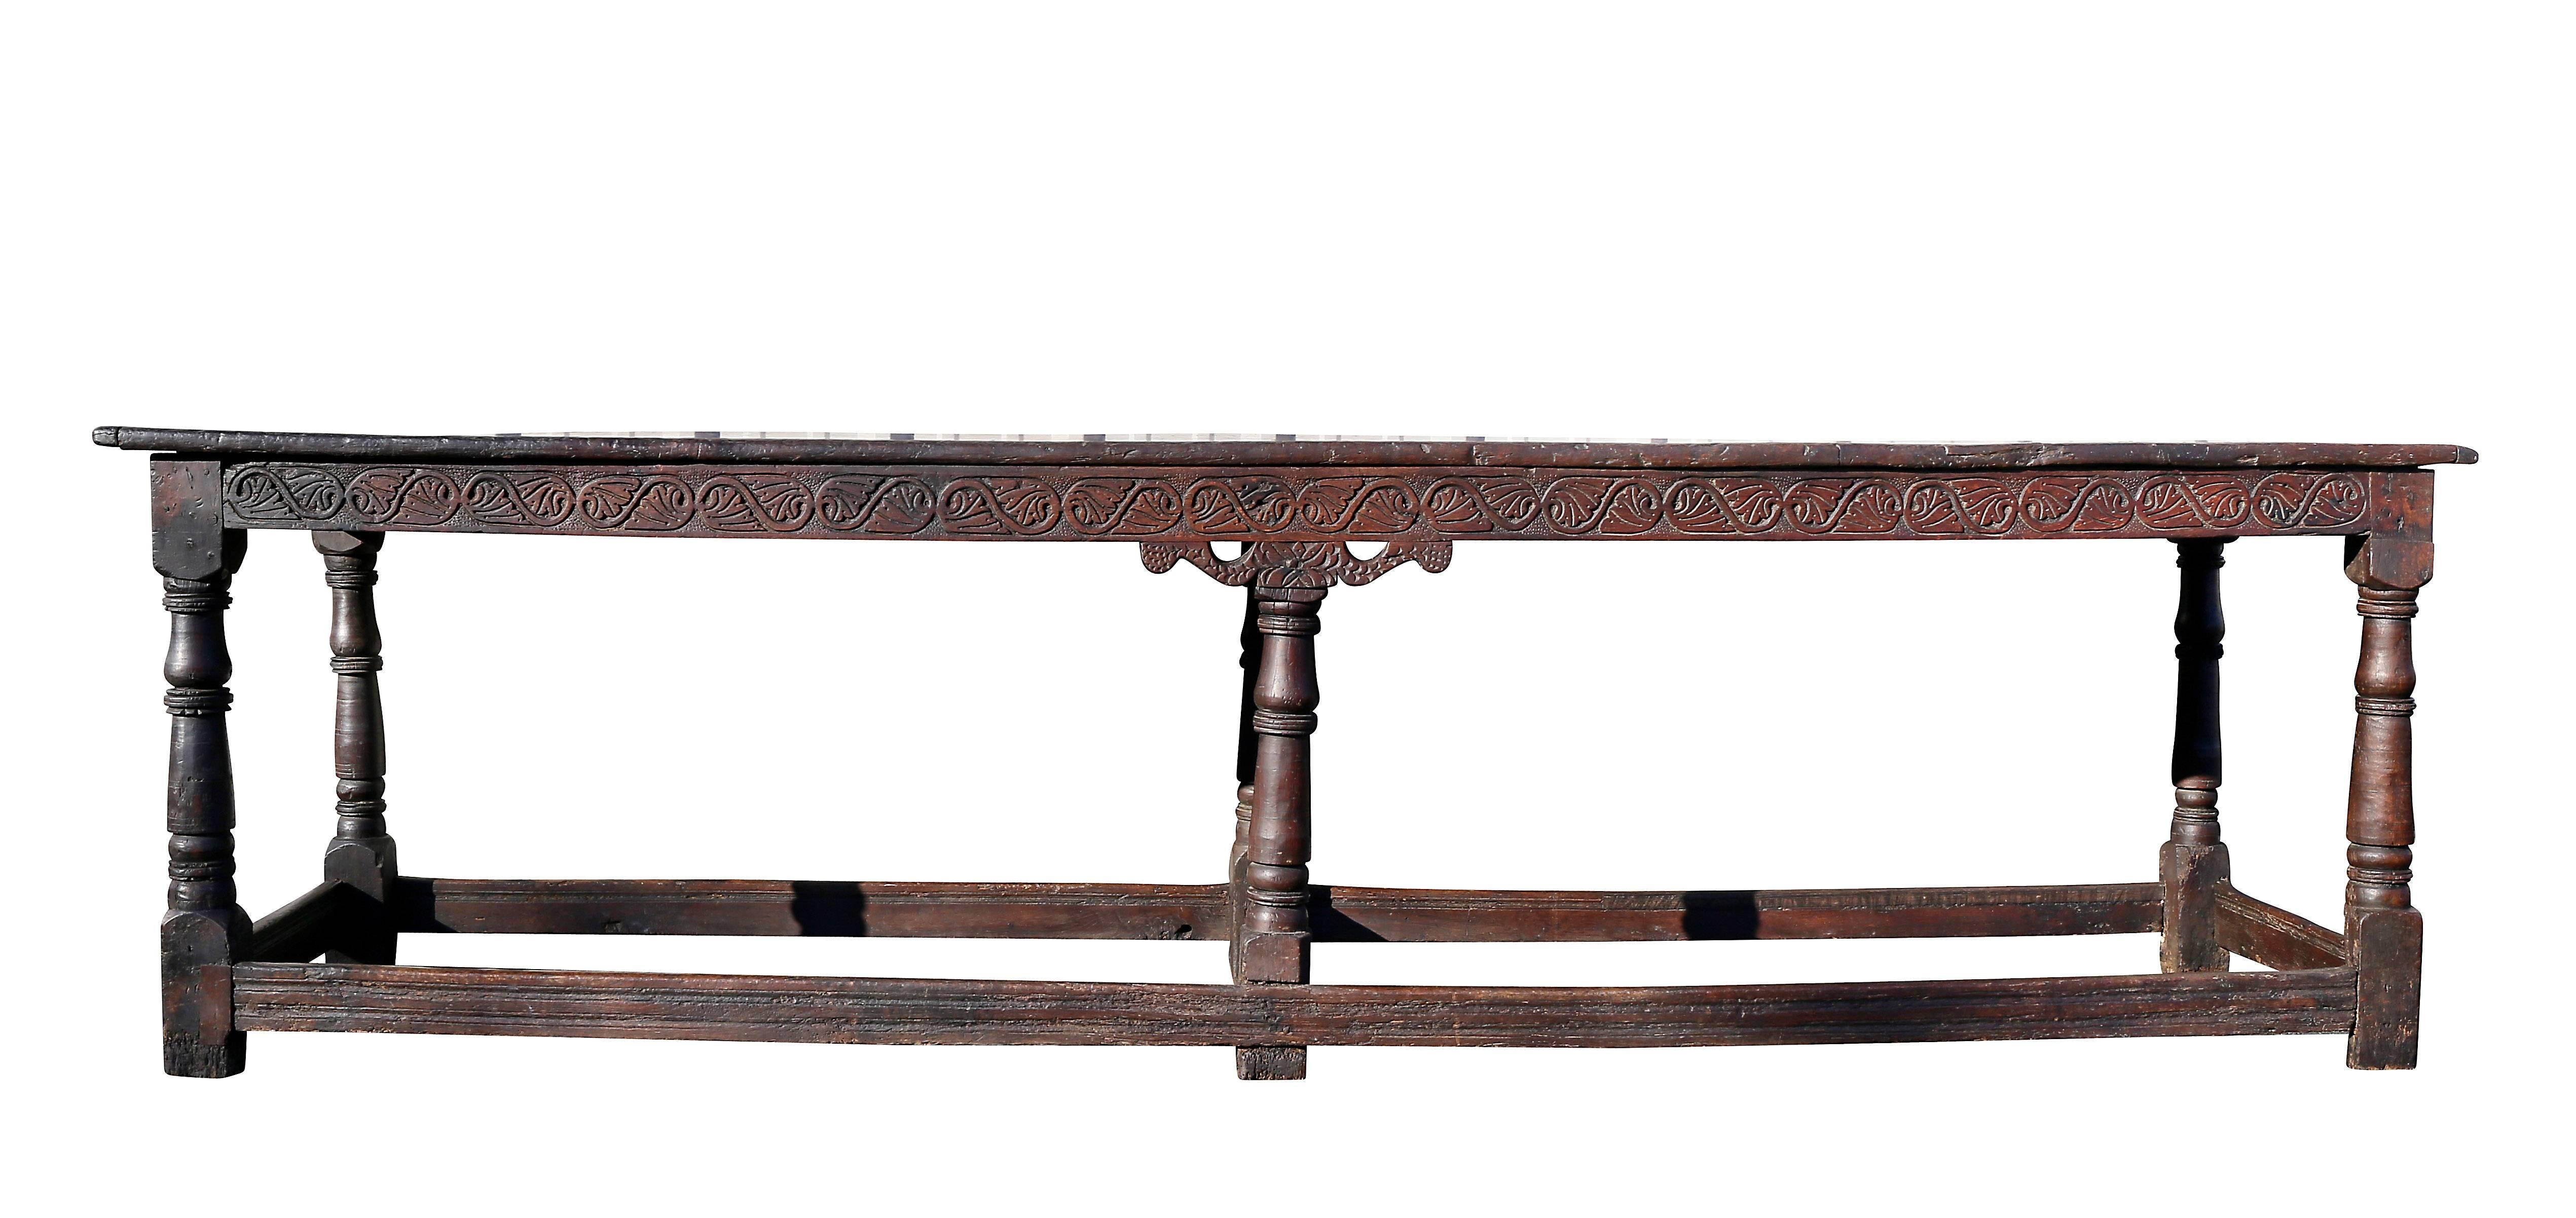 With plank board top with battened ends over a frieze carved with stylized leaves and raised on six turned legs joined by a box stretcher. Back with horizontal carved and molded design. Slight reduction in length from original size.